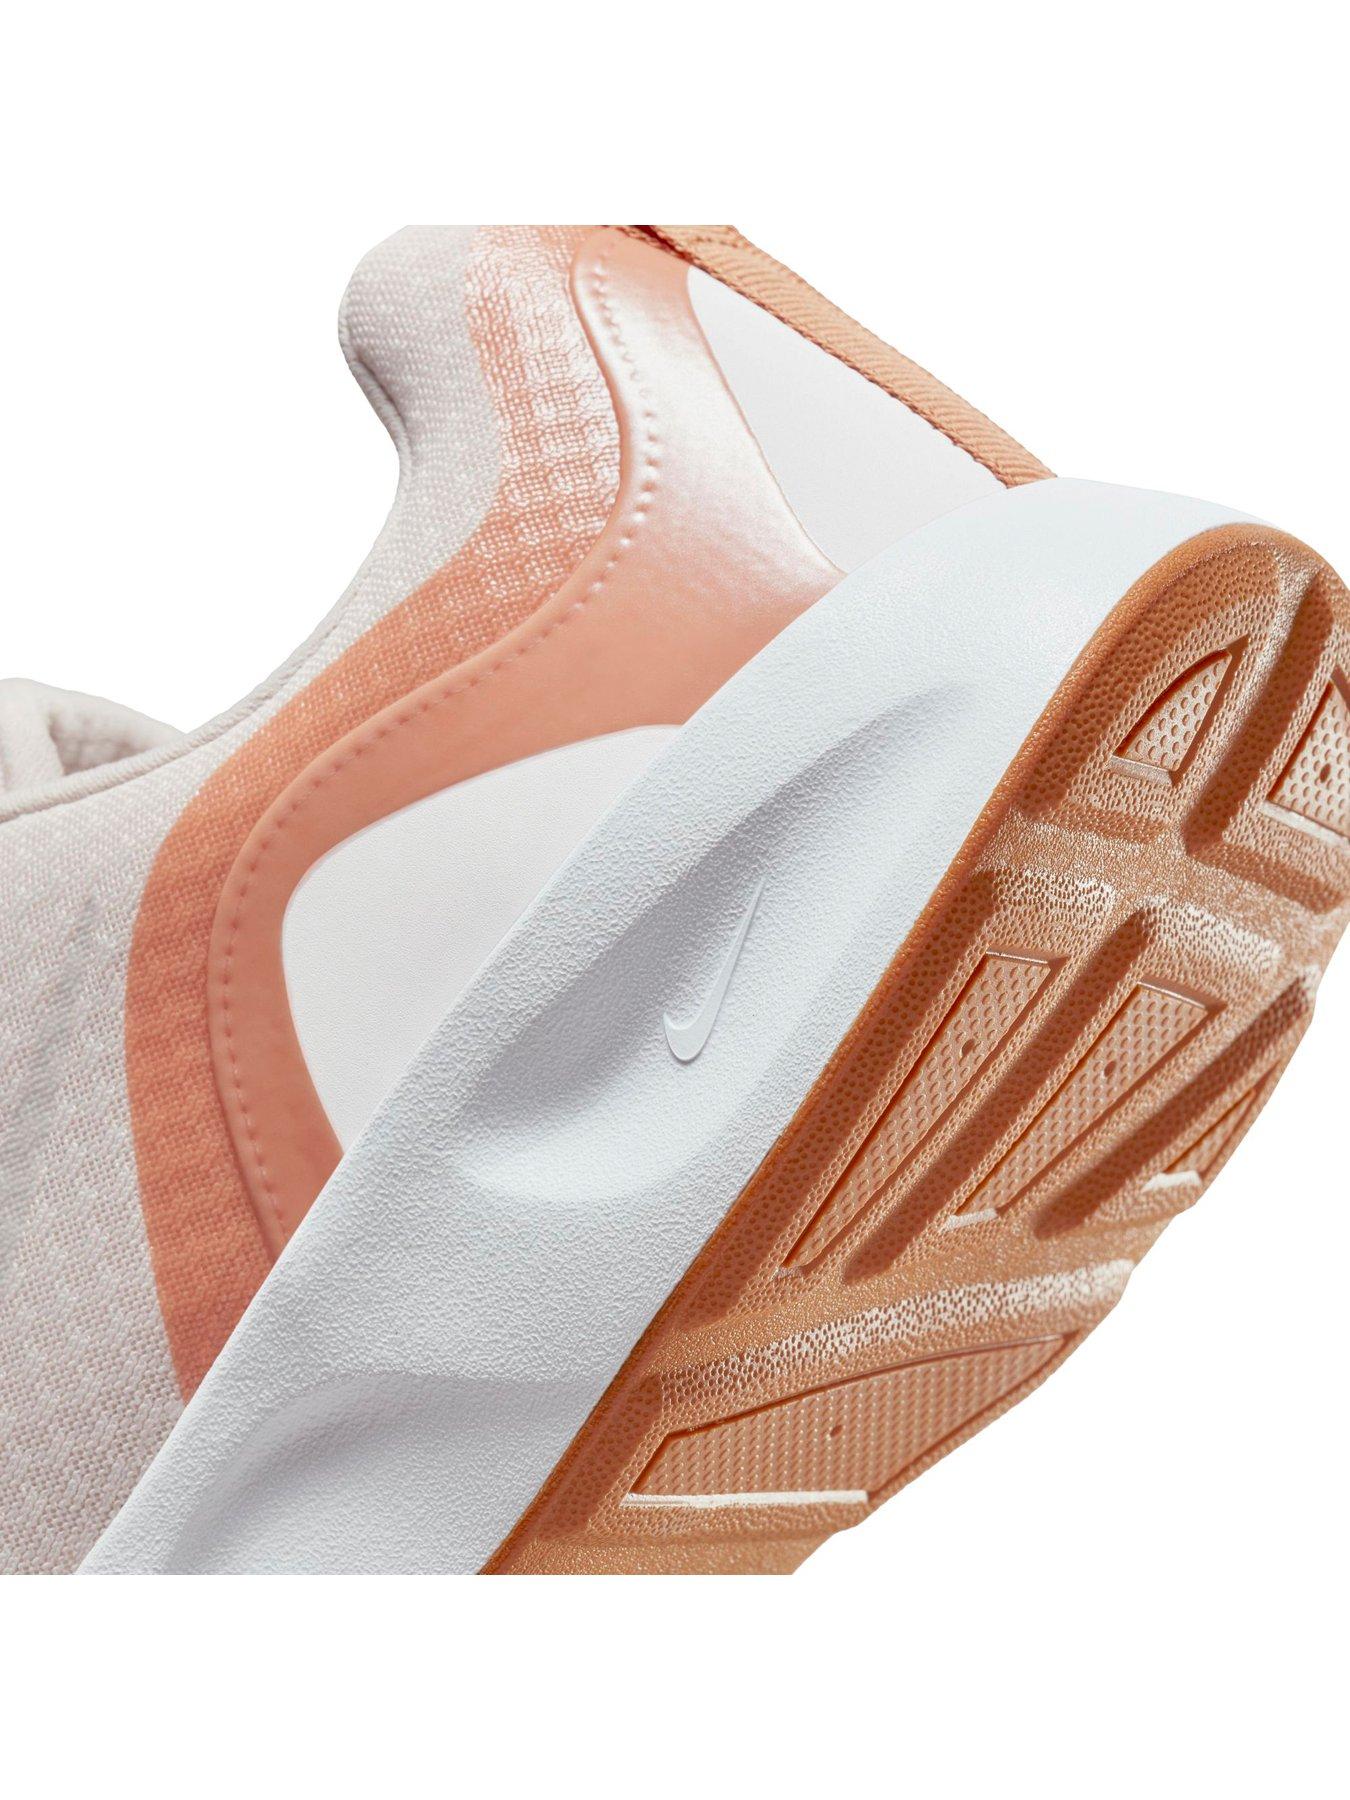 Trainers Wearallday - Pink/White